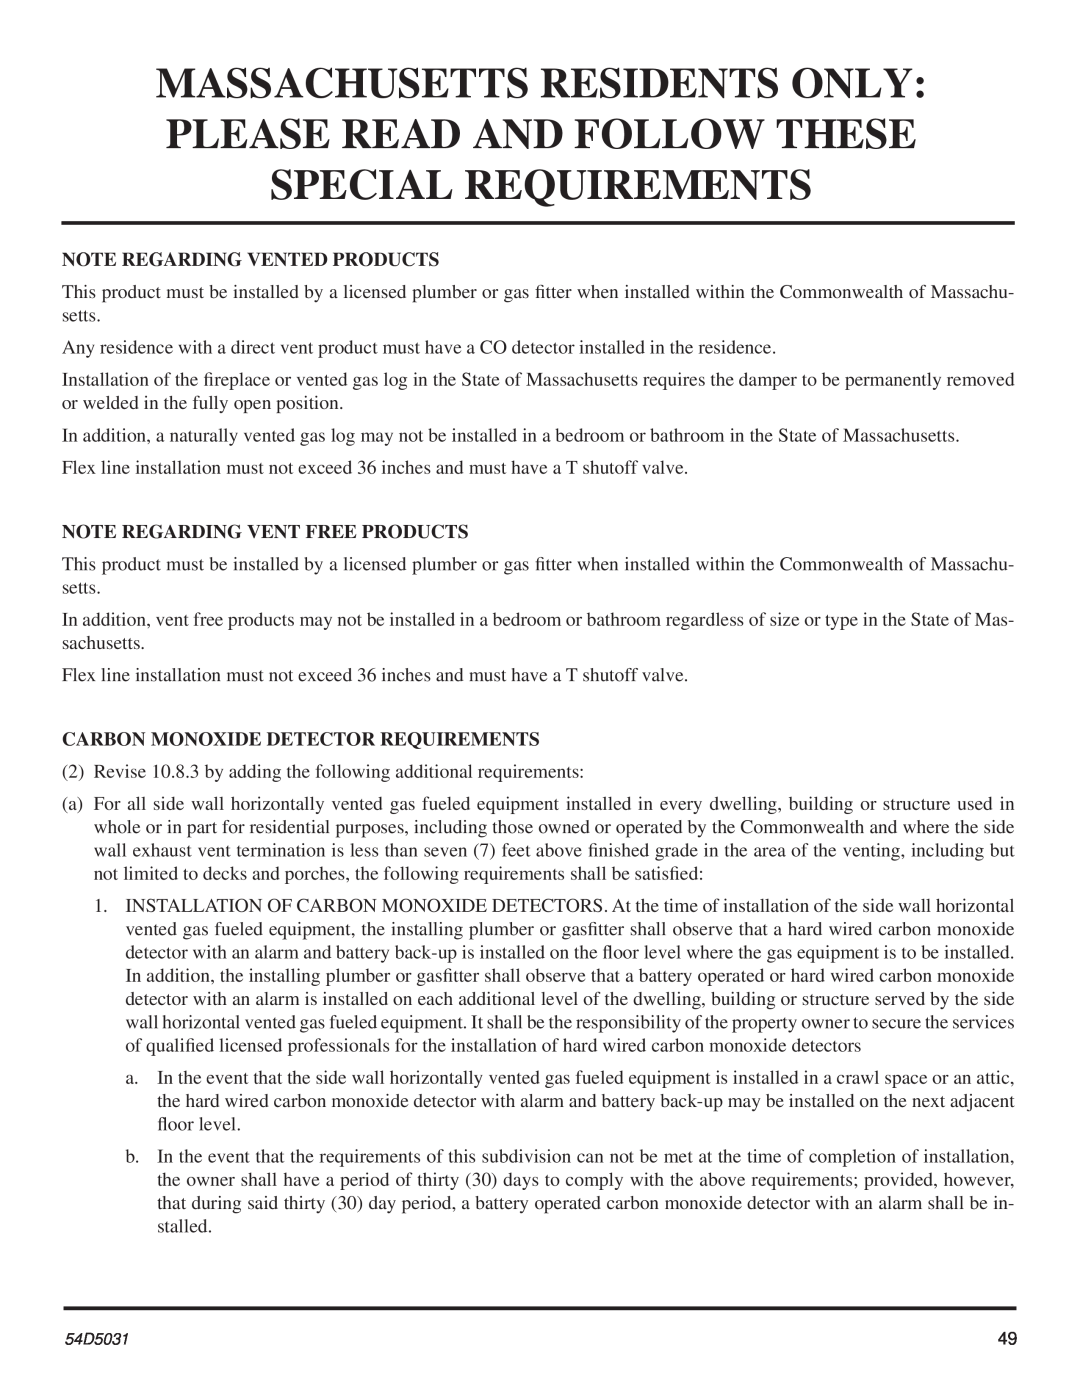 Monessen Hearth HBDV300, HBDV400 Special Requirements, Note Regarding Vented Products, Note Regarding Vent Free Products 